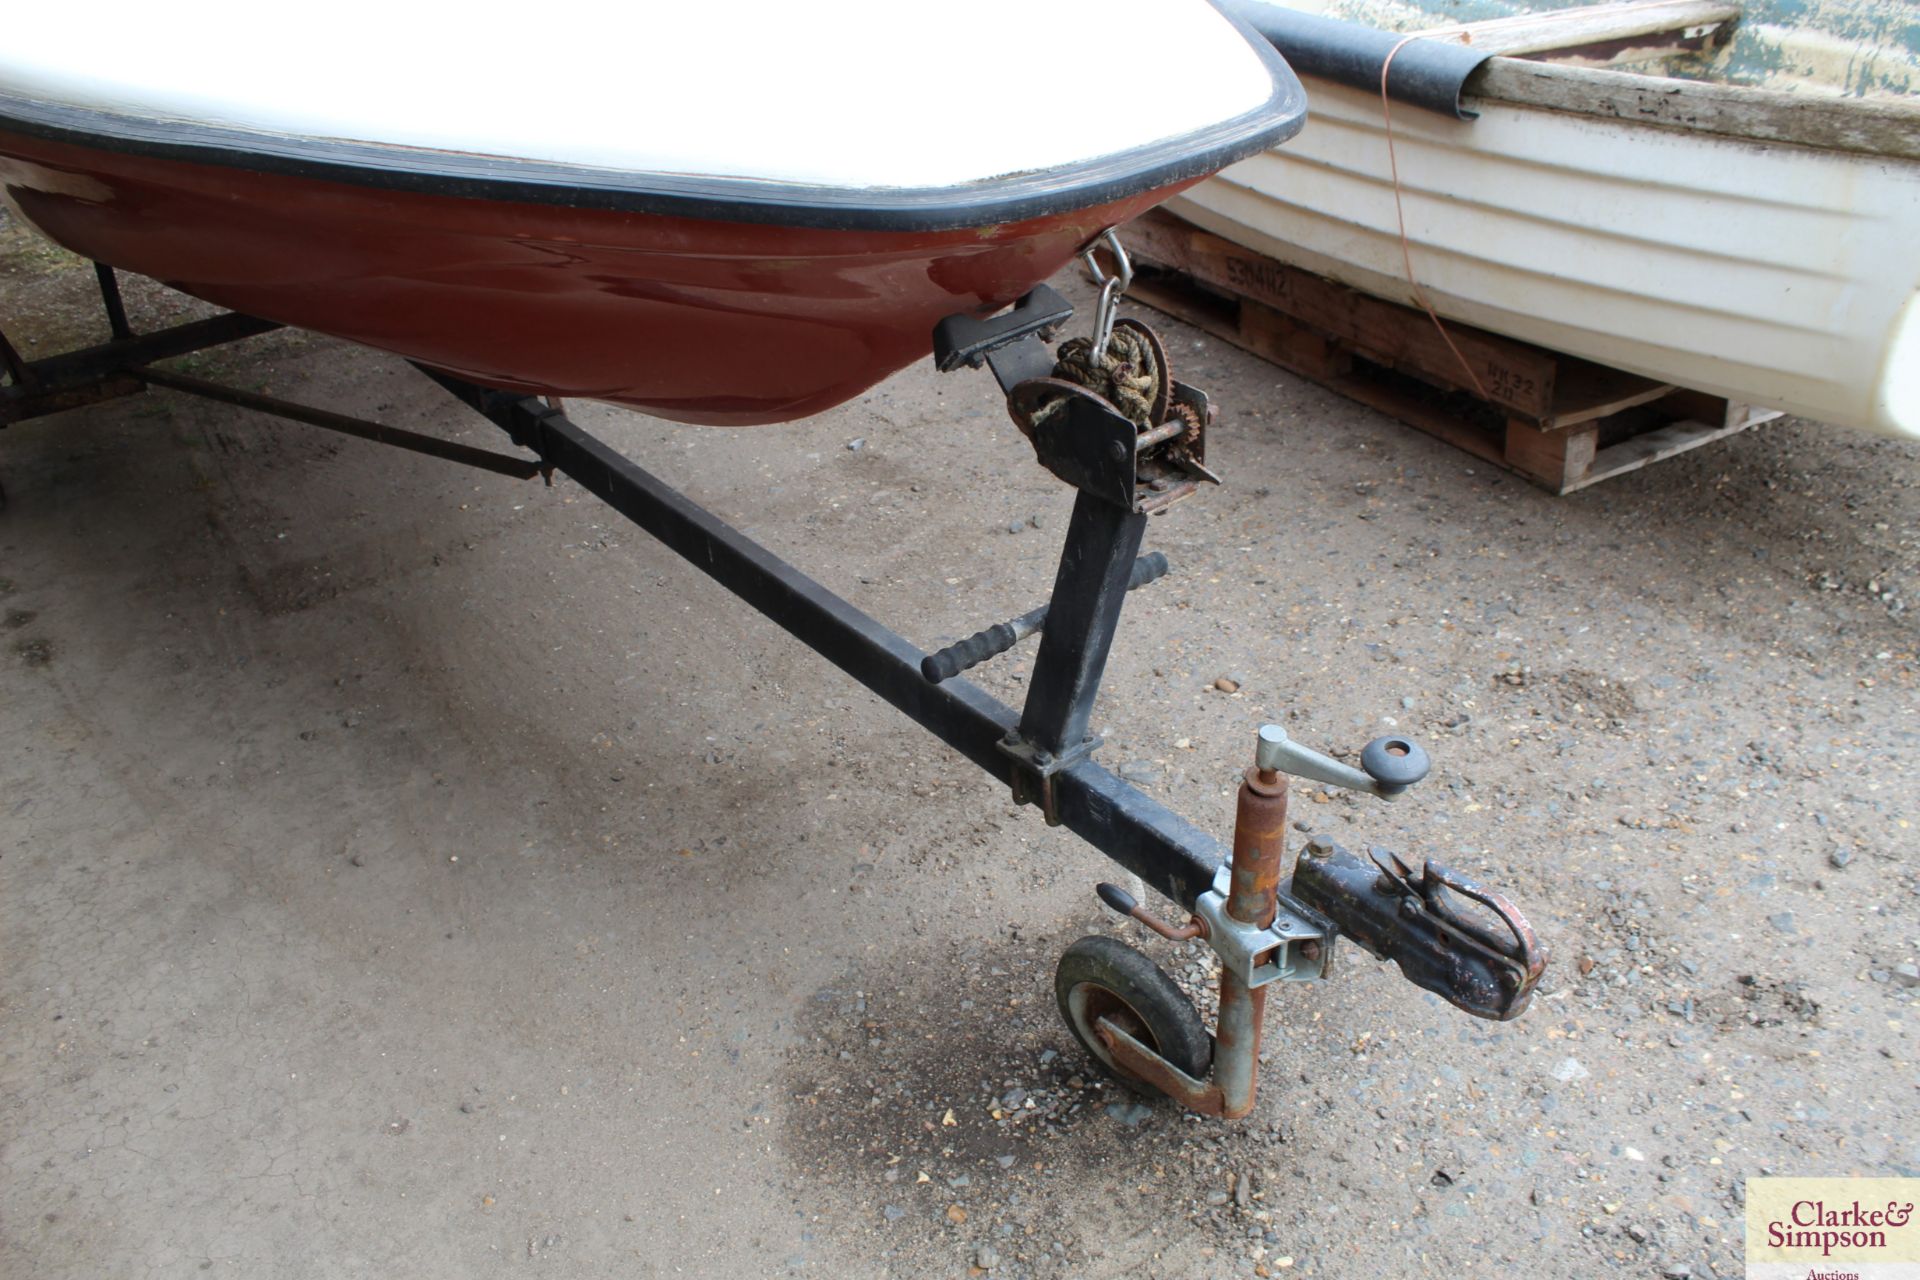 13ft speedboat. With Evinrude 60HP outboard (runs and pumps water), trailer, water skis, knee board, - Image 15 of 17